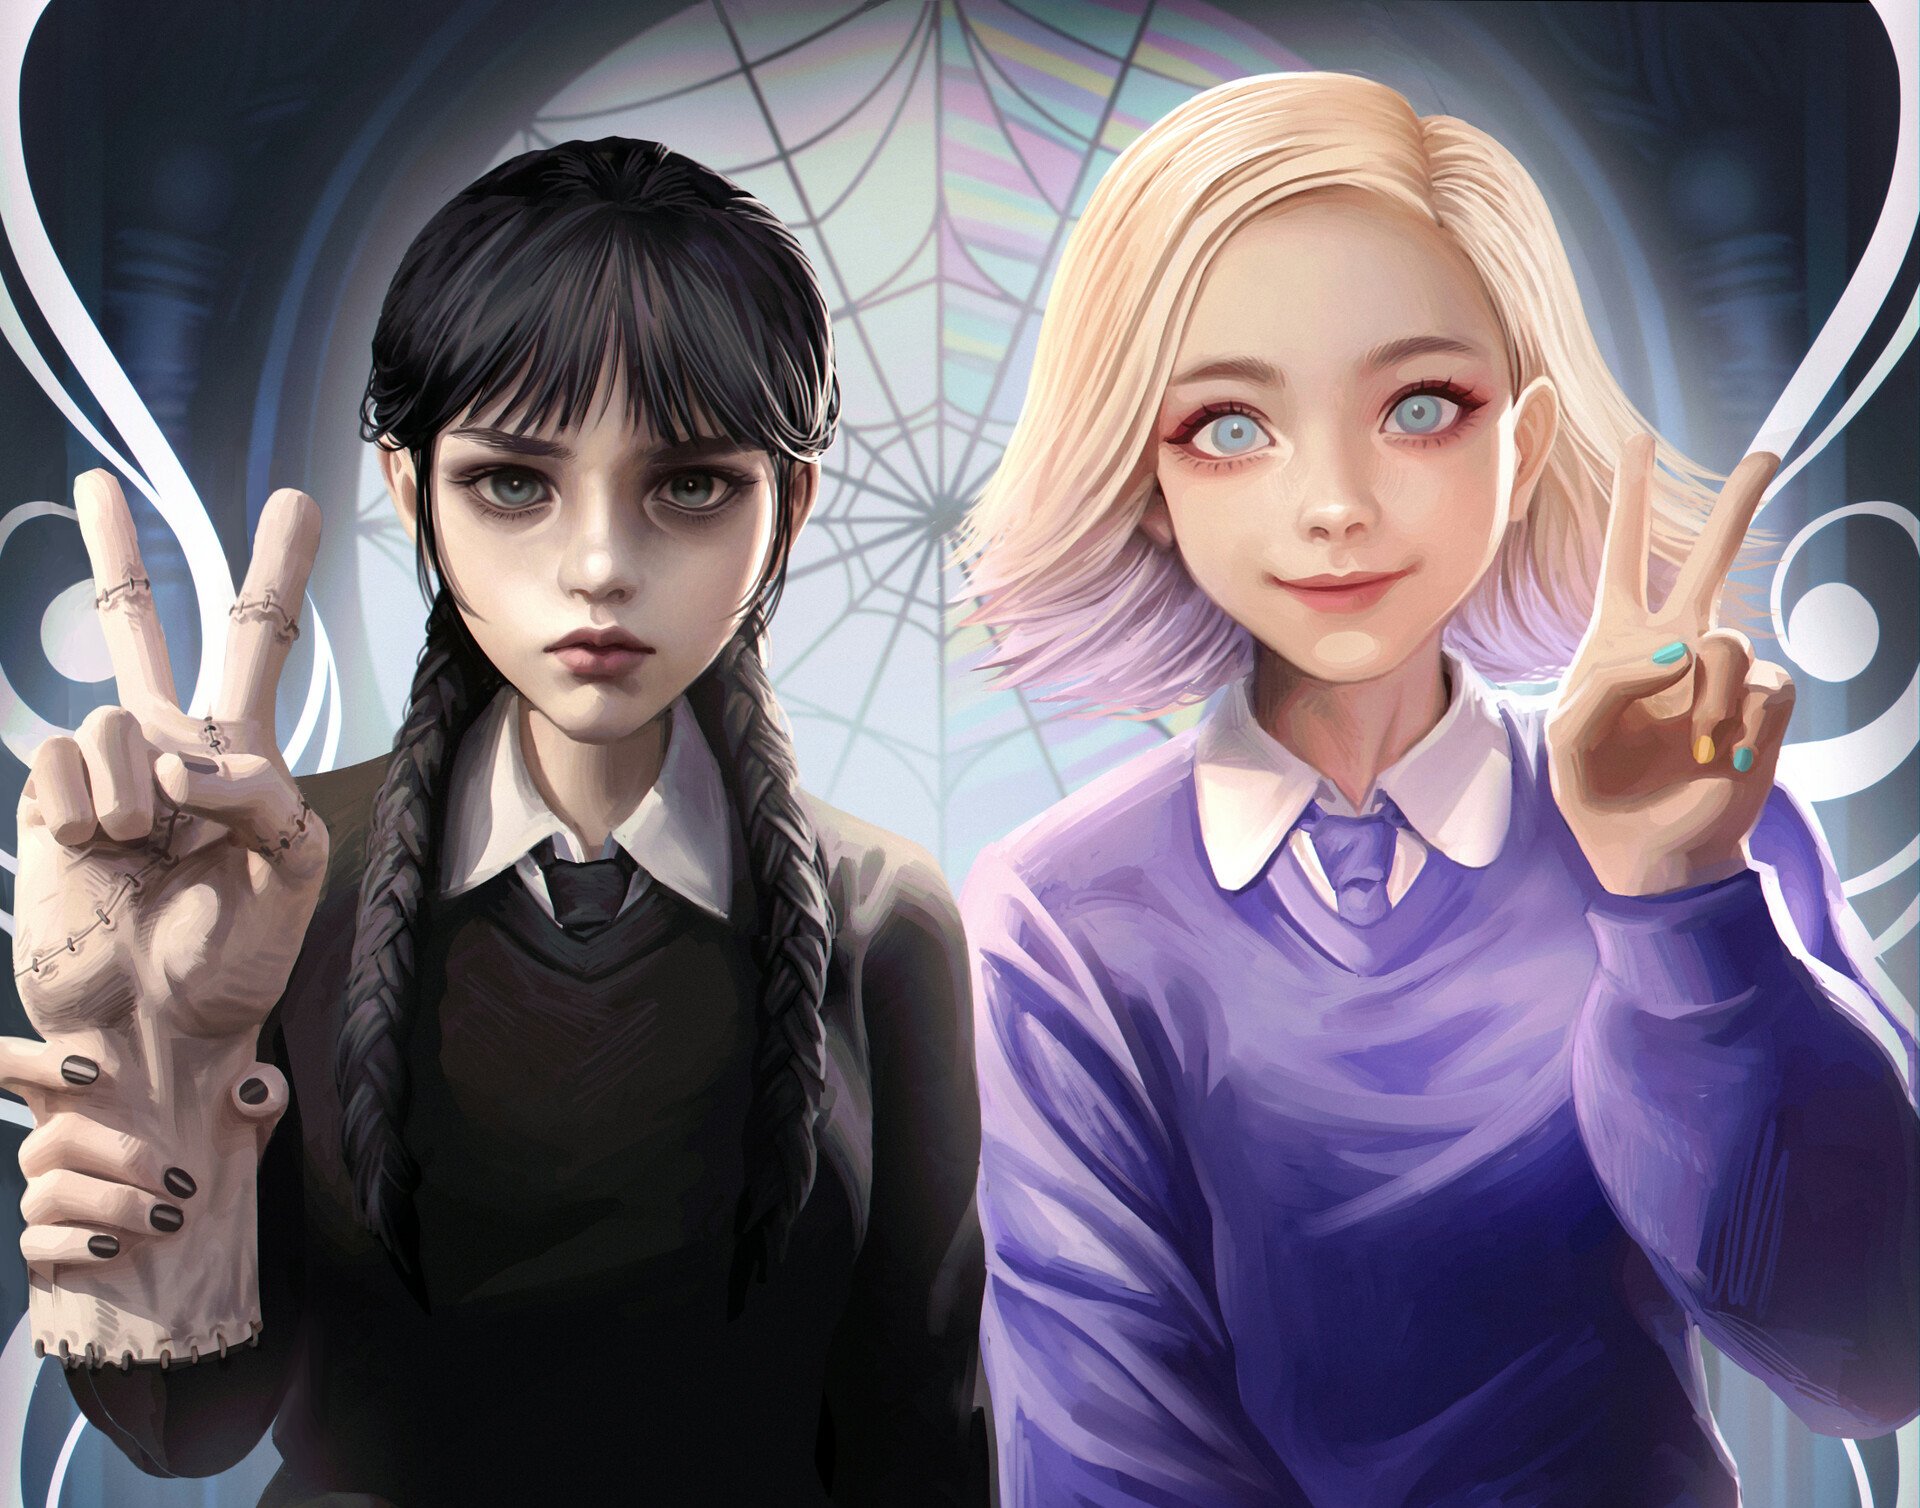 Thing, Wednesday & Enid (by Kris6758) in 2023 | Wednesday addams, Addams  family, Wednesday movie